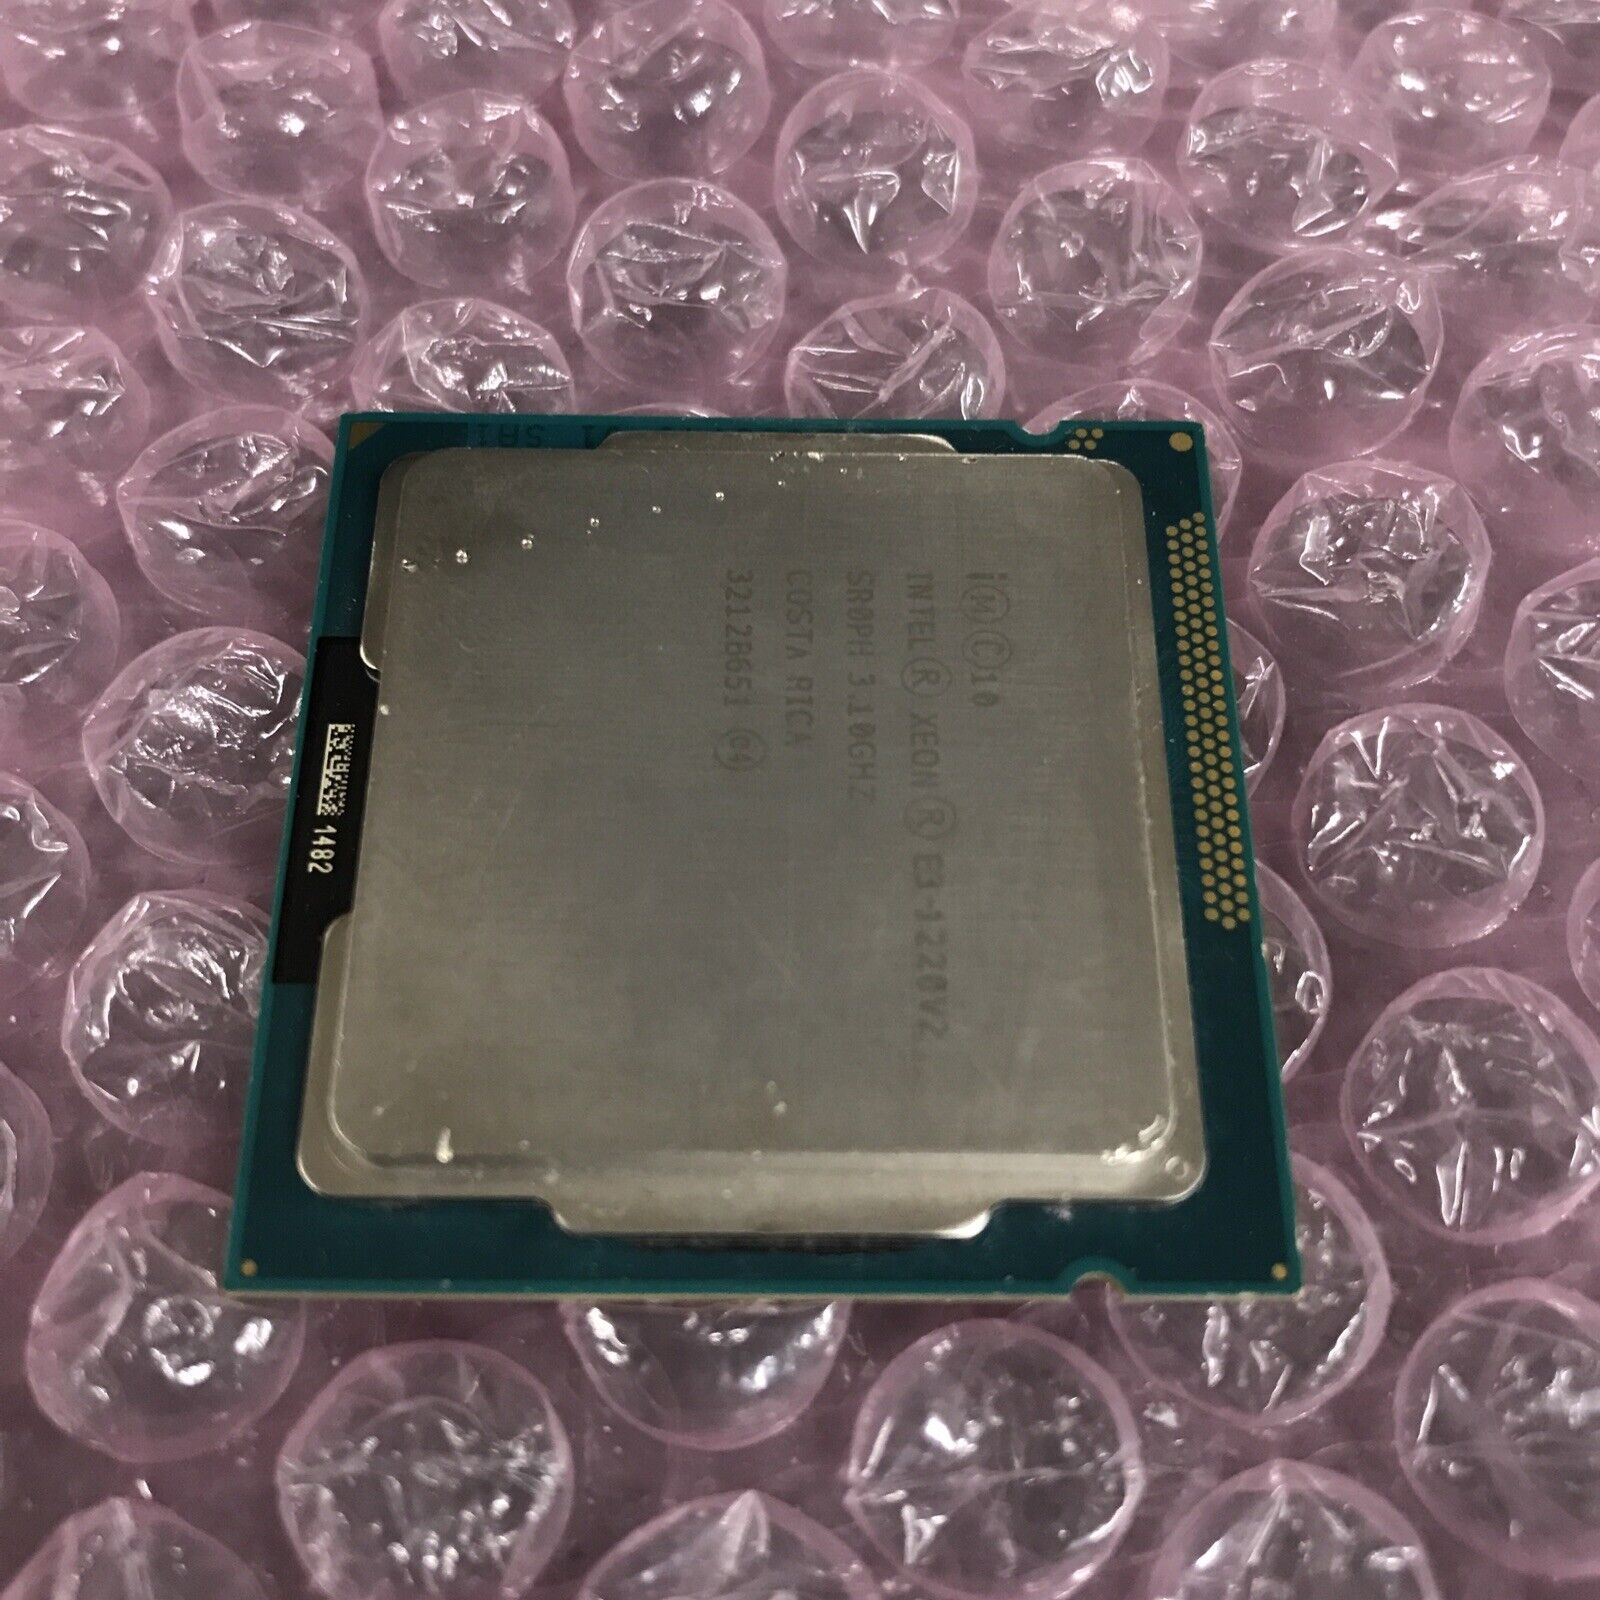 Intel Xeon E3-1220V2 SR0PH 3.1GHZ (Tested and Working)